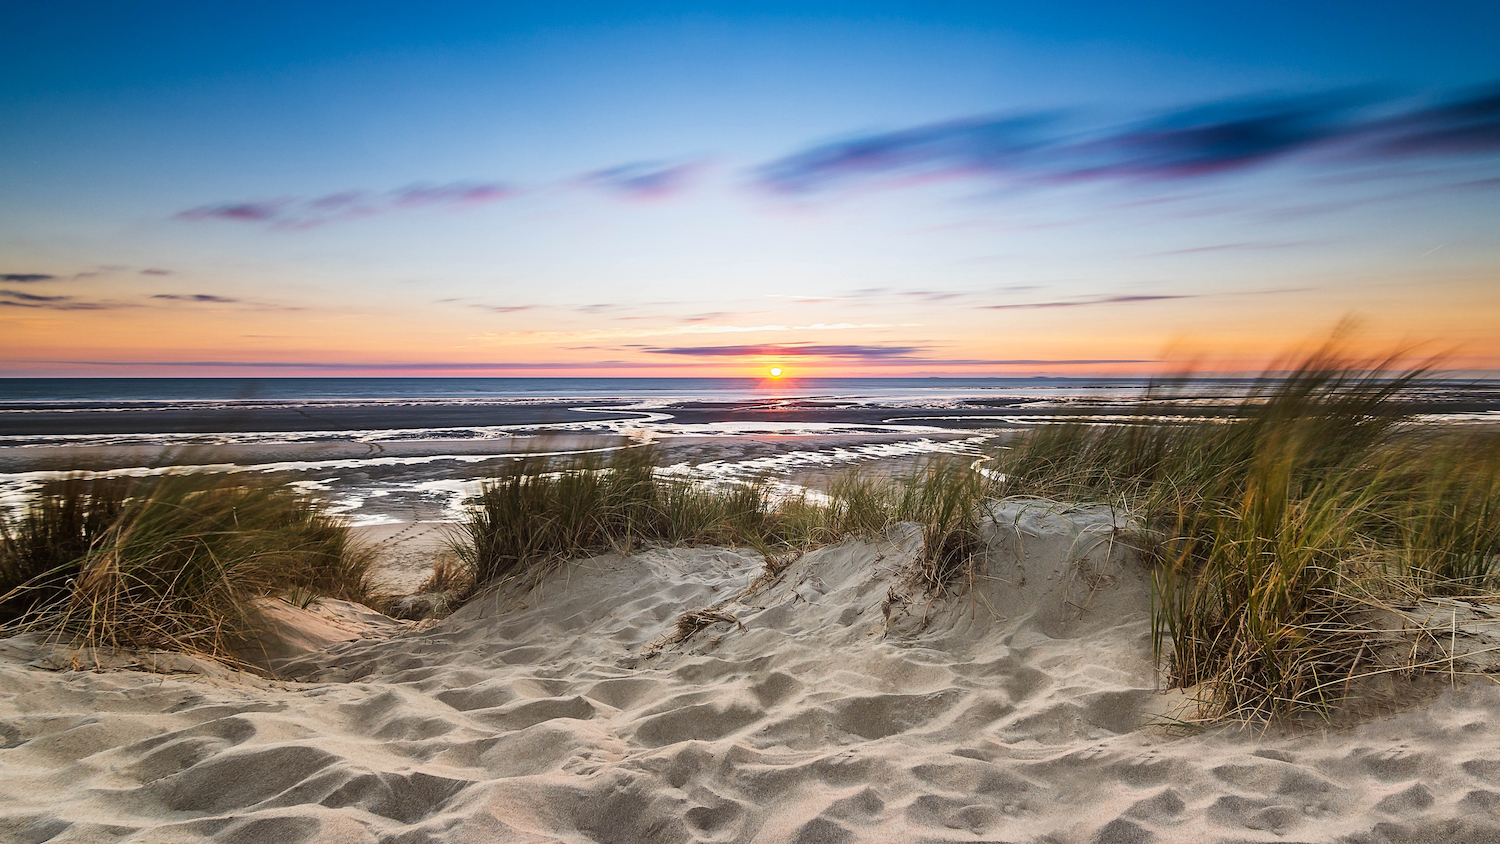 Sunset over sand dune and beach